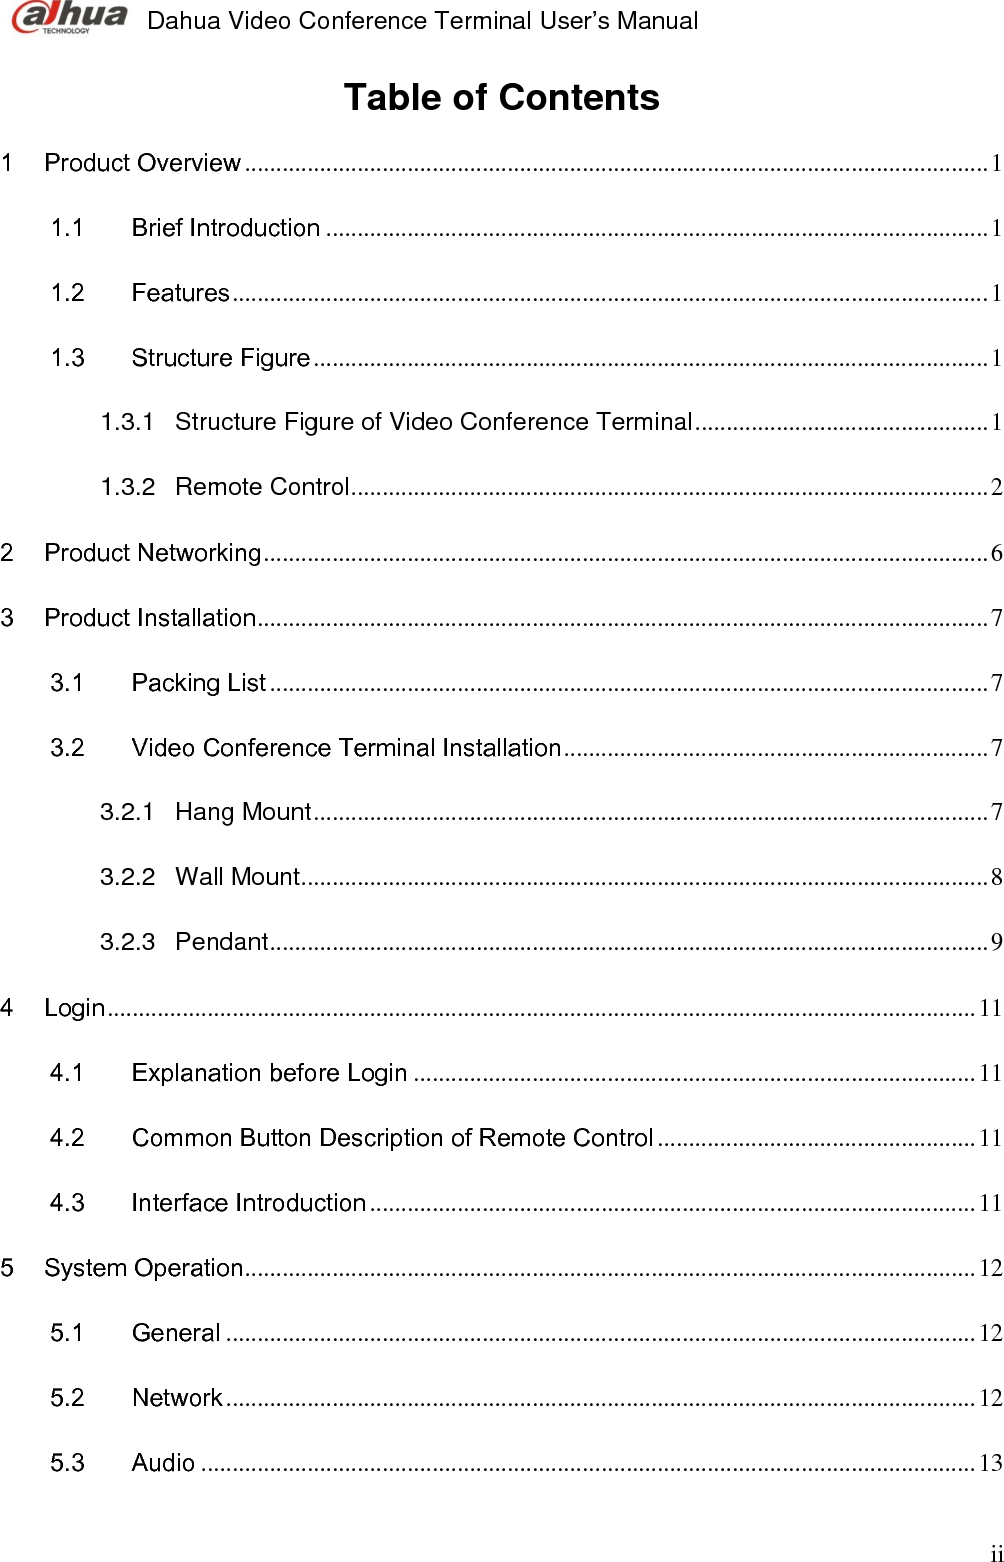  Dahua Video Conference Terminal User’s Manual   ii Table of Contents  1 Product Overview ....................................................................................................................... 1 1.1 Brief Introduction .......................................................................................................... 1 1.2 Features ......................................................................................................................... 1 1.3 Structure Figure ............................................................................................................ 1 1.3.1 Structure Figure of Video Conference Terminal ............................................... 1 1.3.2 Remote Control ...................................................................................................... 2 2 Product Networking .................................................................................................................... 6 3 Product Installation ..................................................................................................................... 7 3.1 Packing List ................................................................................................................... 7 3.2 Video Conference Terminal Installation .................................................................... 7 3.2.1 Hang Mount ............................................................................................................ 7 3.2.2 Wall Mount .............................................................................................................. 8 3.2.3 Pendant ................................................................................................................... 9 4 Login ........................................................................................................................................... 11 4.1 Explanation before Login .......................................................................................... 11 4.2 Common Button Description of Remote Control ................................................... 11 4.3 Interface Introduction ................................................................................................. 11 5 System Operation ..................................................................................................................... 12 5.1 General ........................................................................................................................ 12 5.2 Network ........................................................................................................................ 12 5.3 Audio ............................................................................................................................ 13 